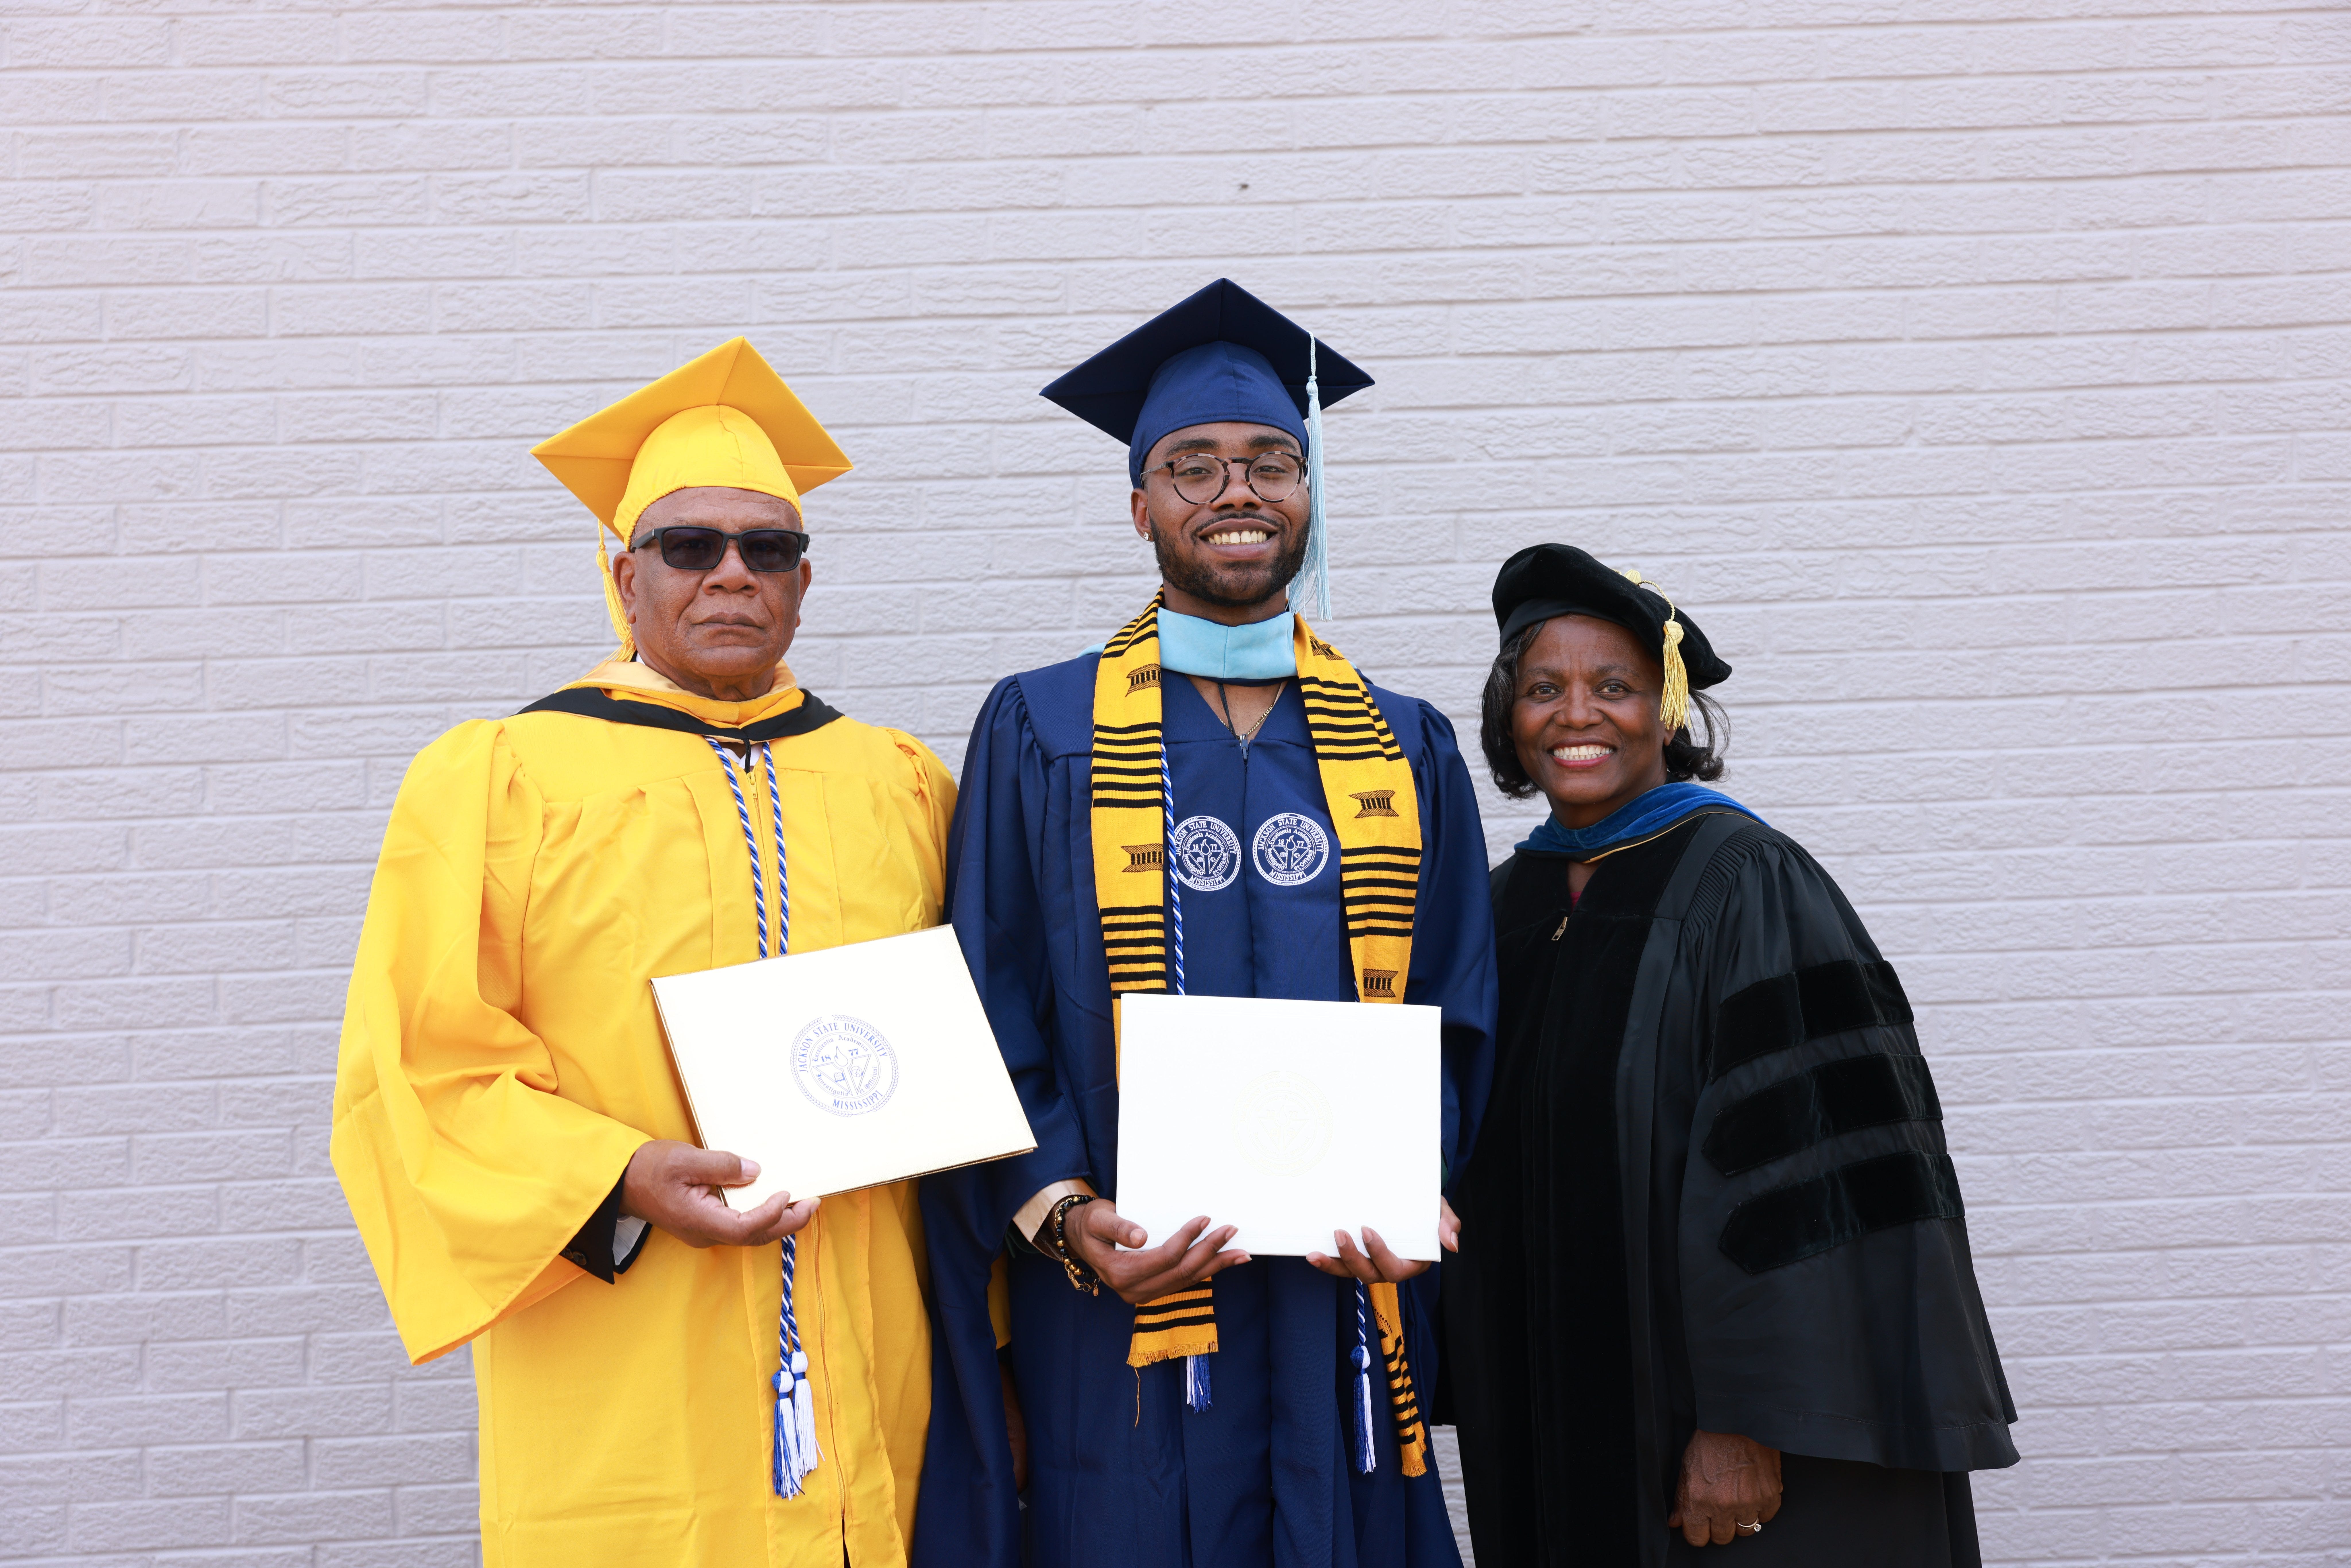 Jackson State University professor Pamela Banks at the spring 2022 JSU commencement ceremony in Jackson, Miss., with her second cousin, Symeon Butler (who received a master’s degree) and her first cousin, Donnie Banyard (left), who received a Golden Diploma marking the 50th anniversary of his graduation.